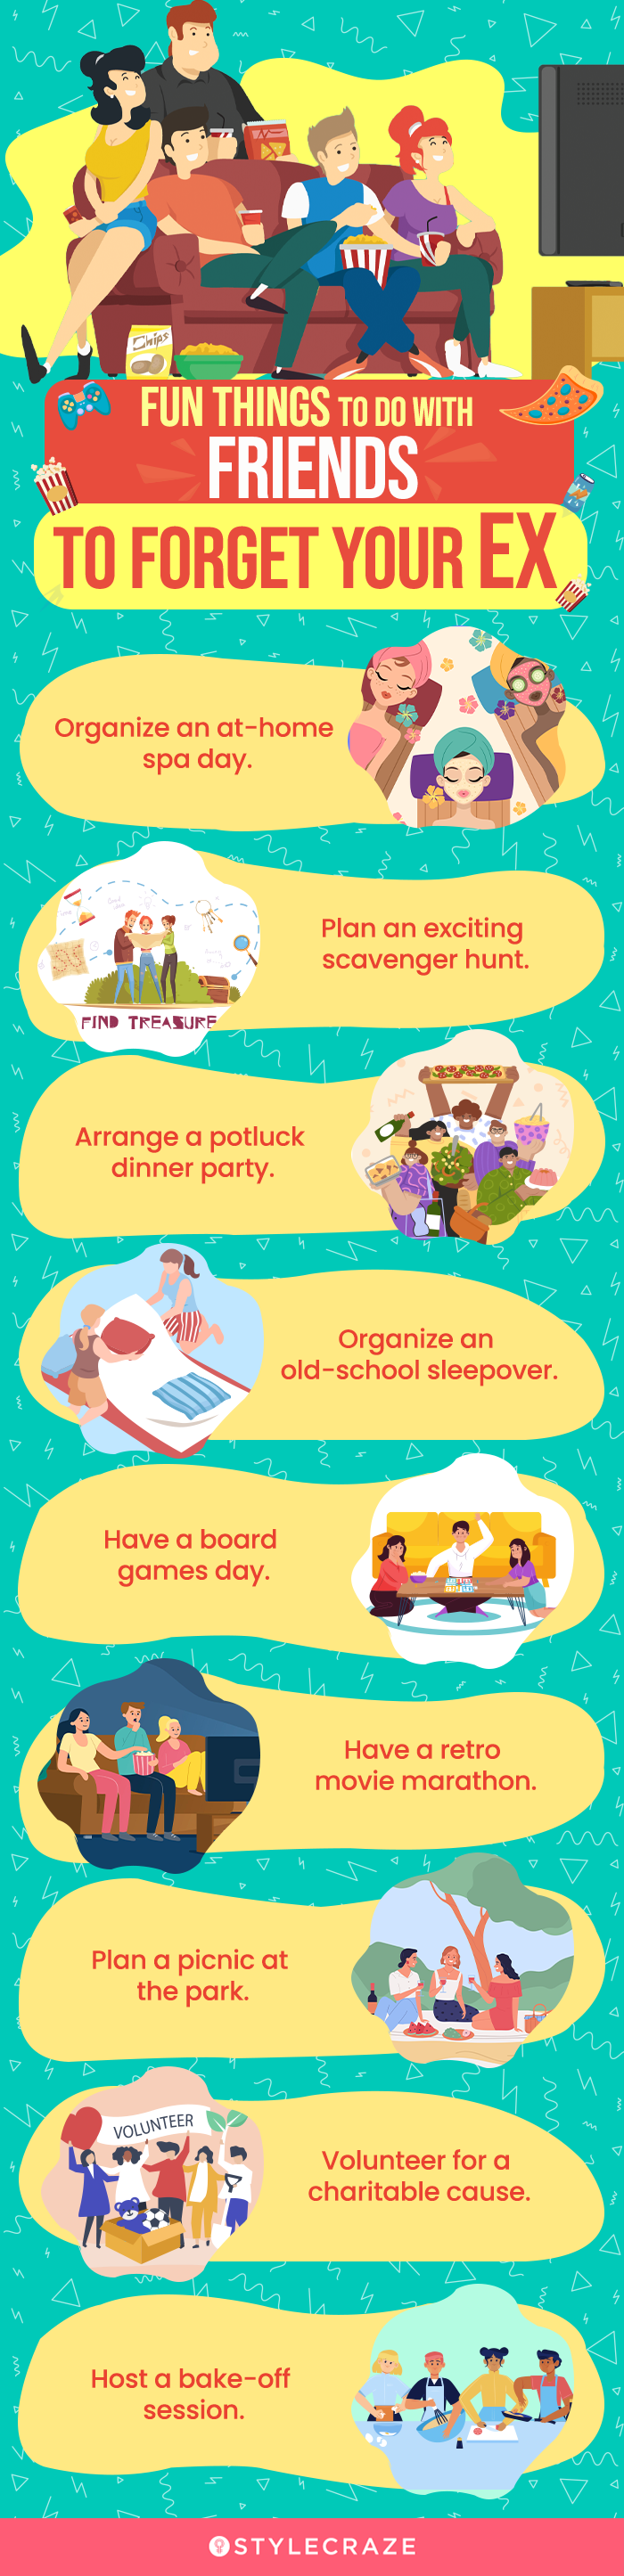 fun things to do with friends to forget your ex (infographic)